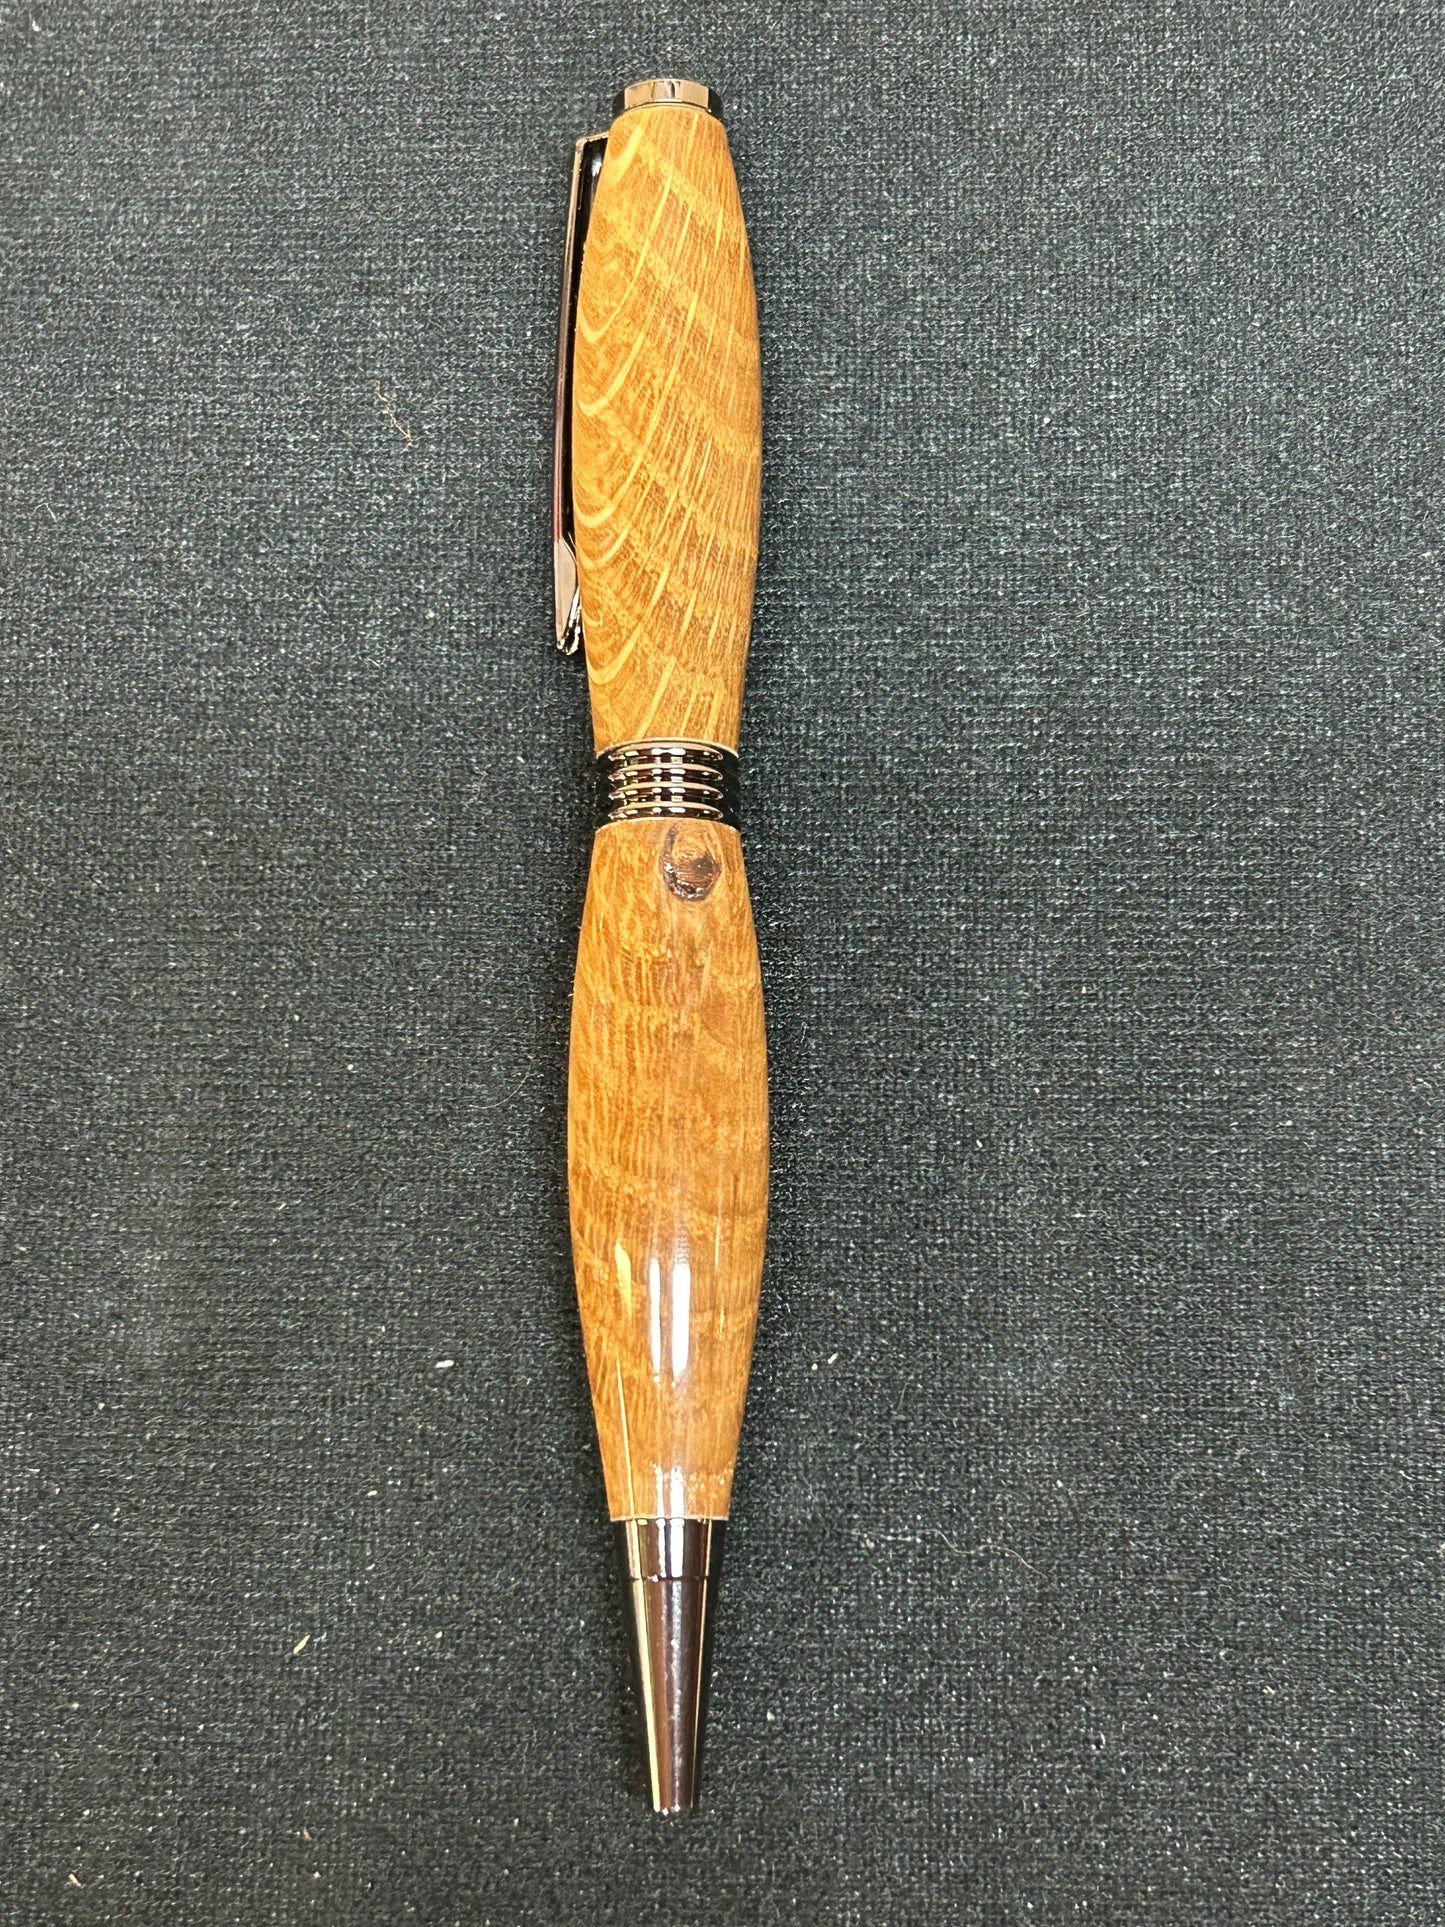 Trimline Twist Pen with Canary Wood and Chrome and Gun Metal Finish